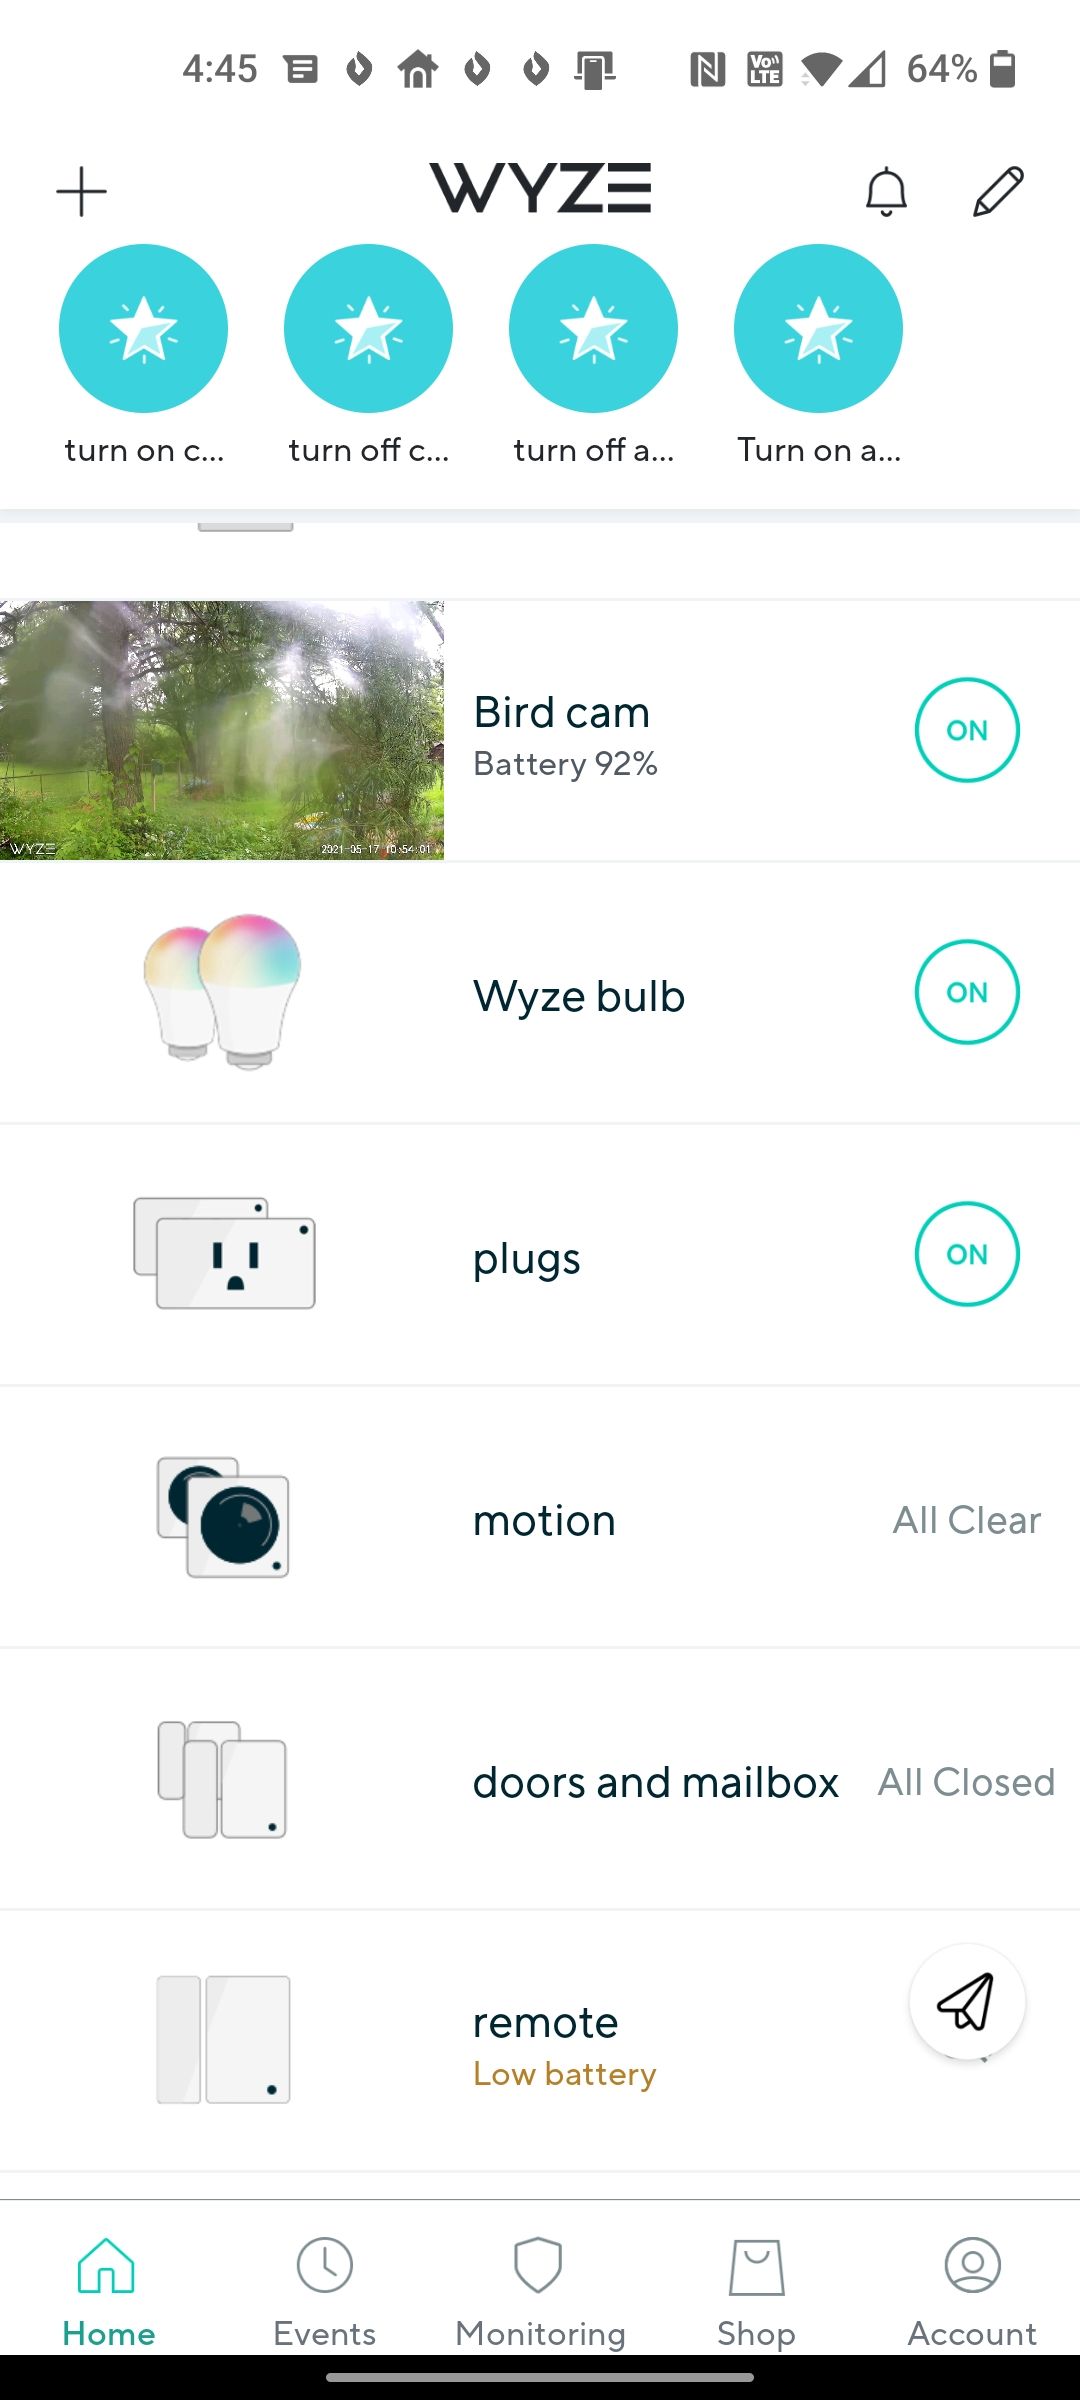 Wyze's Home Monitoring views.